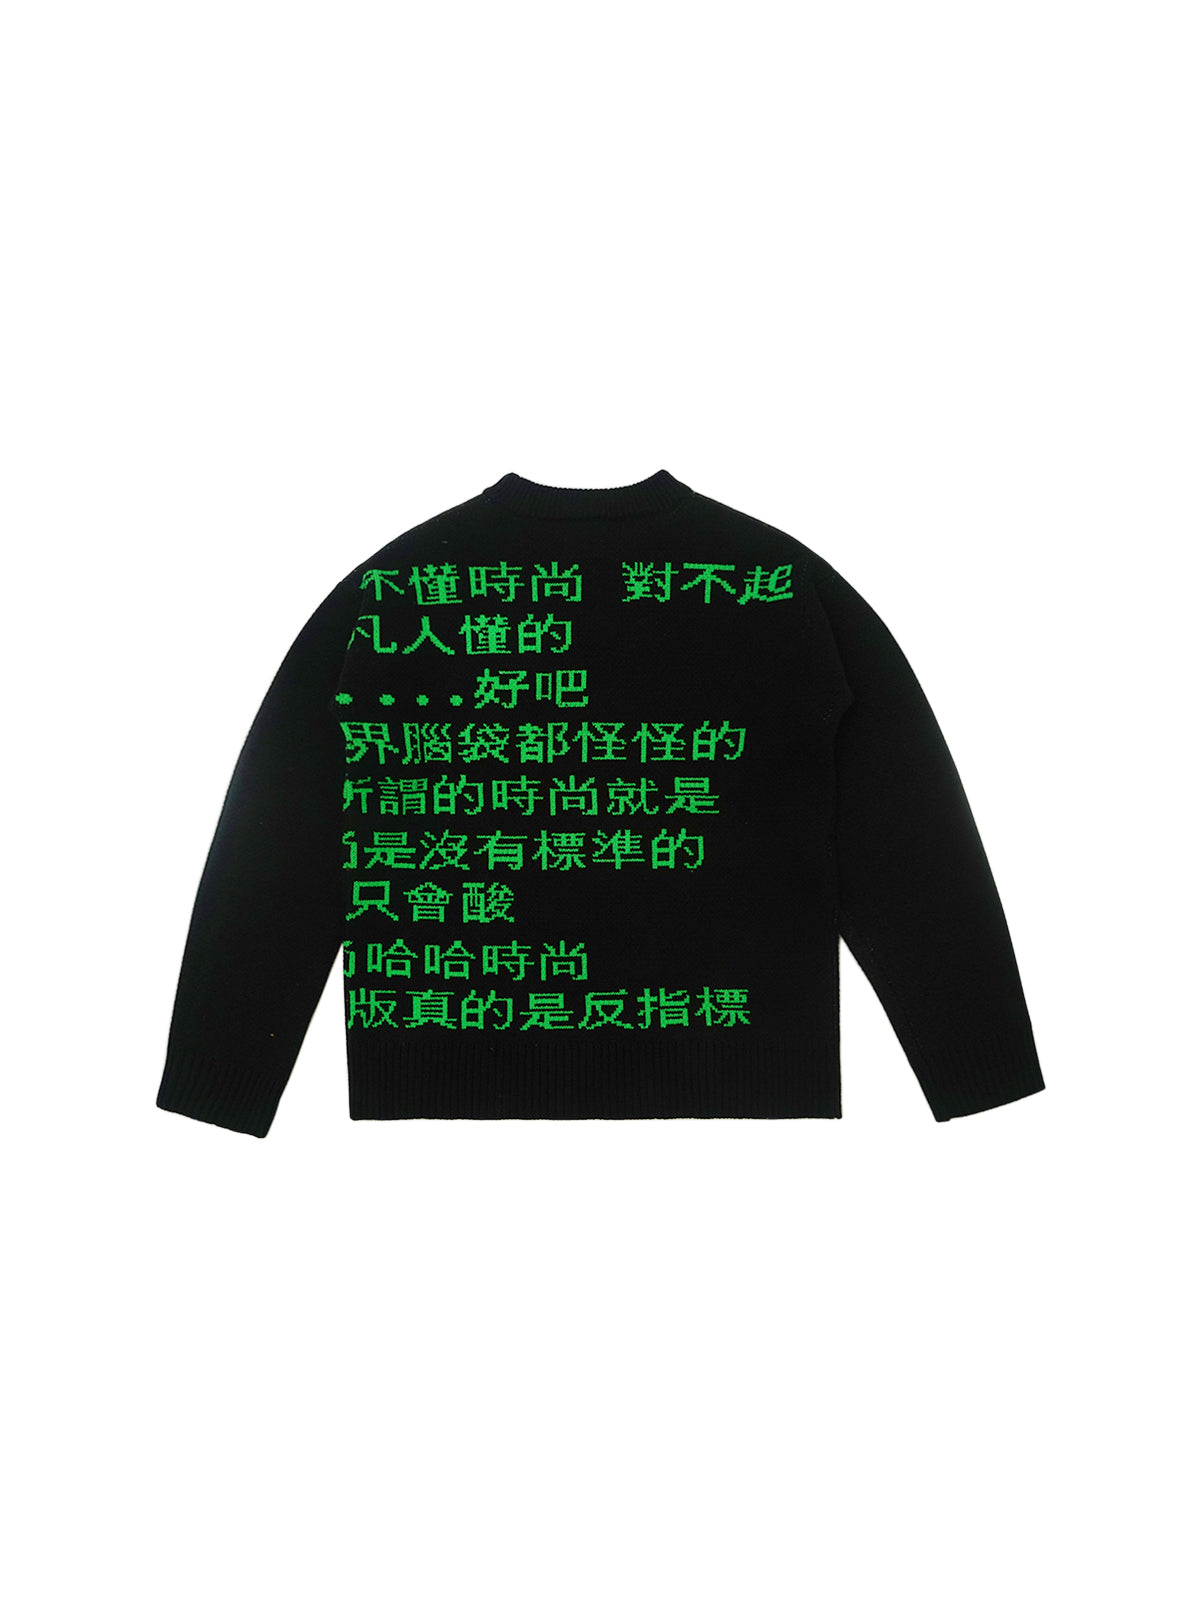 MESSAGE ON SOCIAL MEDIA SWEATER